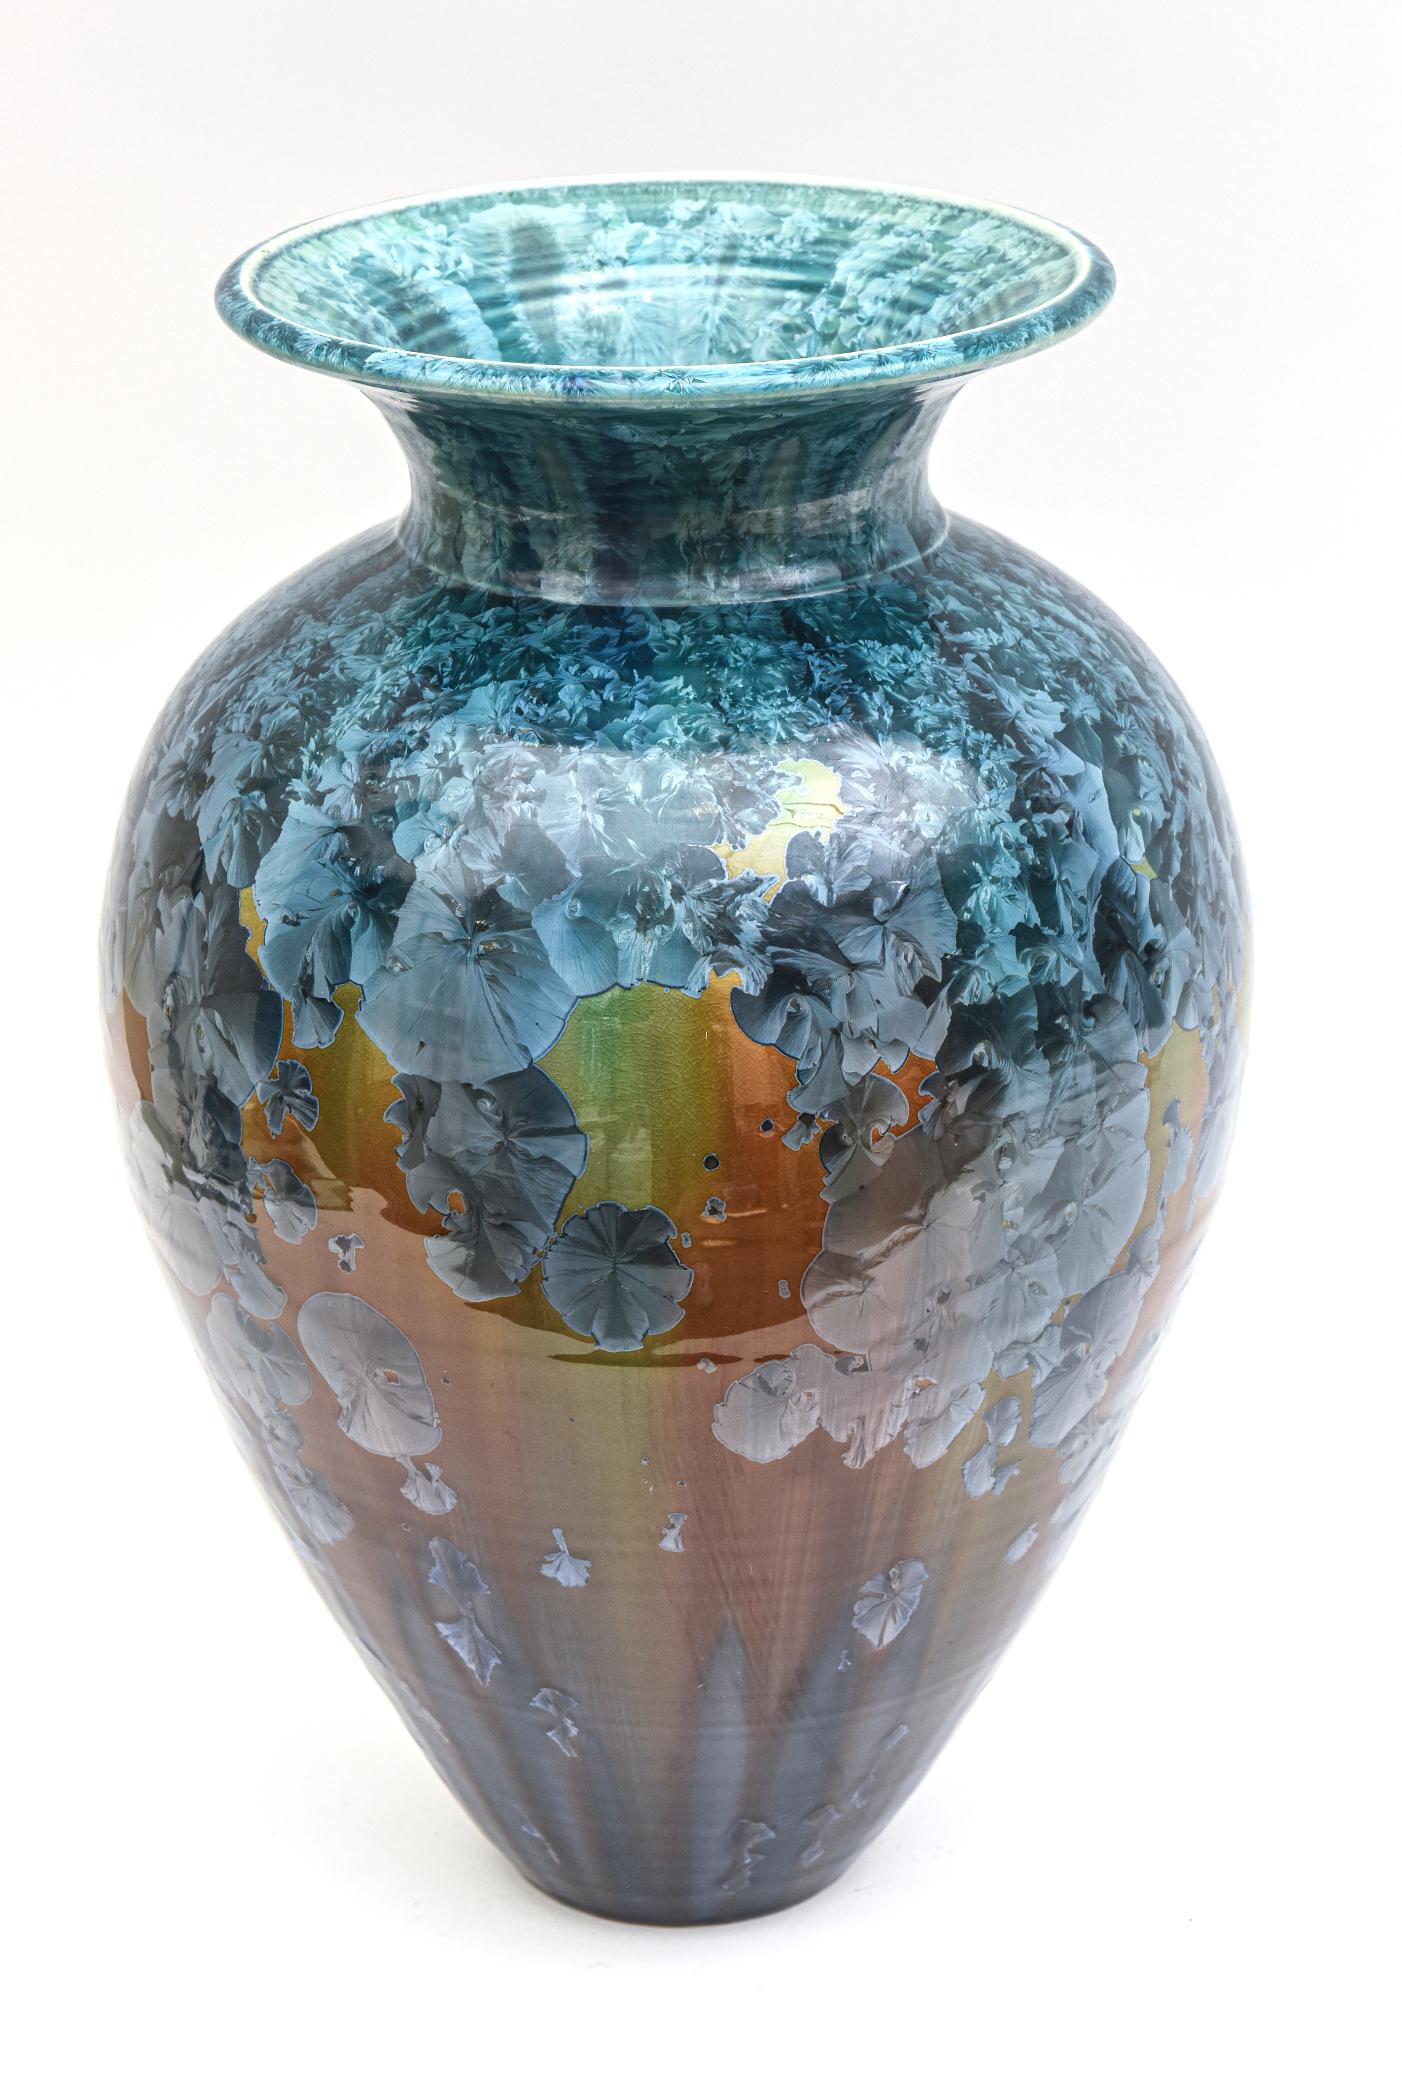 This lovely arresting signed and dated glazed large ceramic vase, vessel or object is with a crystalline glaze. It is signed Phil Morgan and dated 1995. The colors are shades of different blues, aqua teal amber brown, used to form an abstract